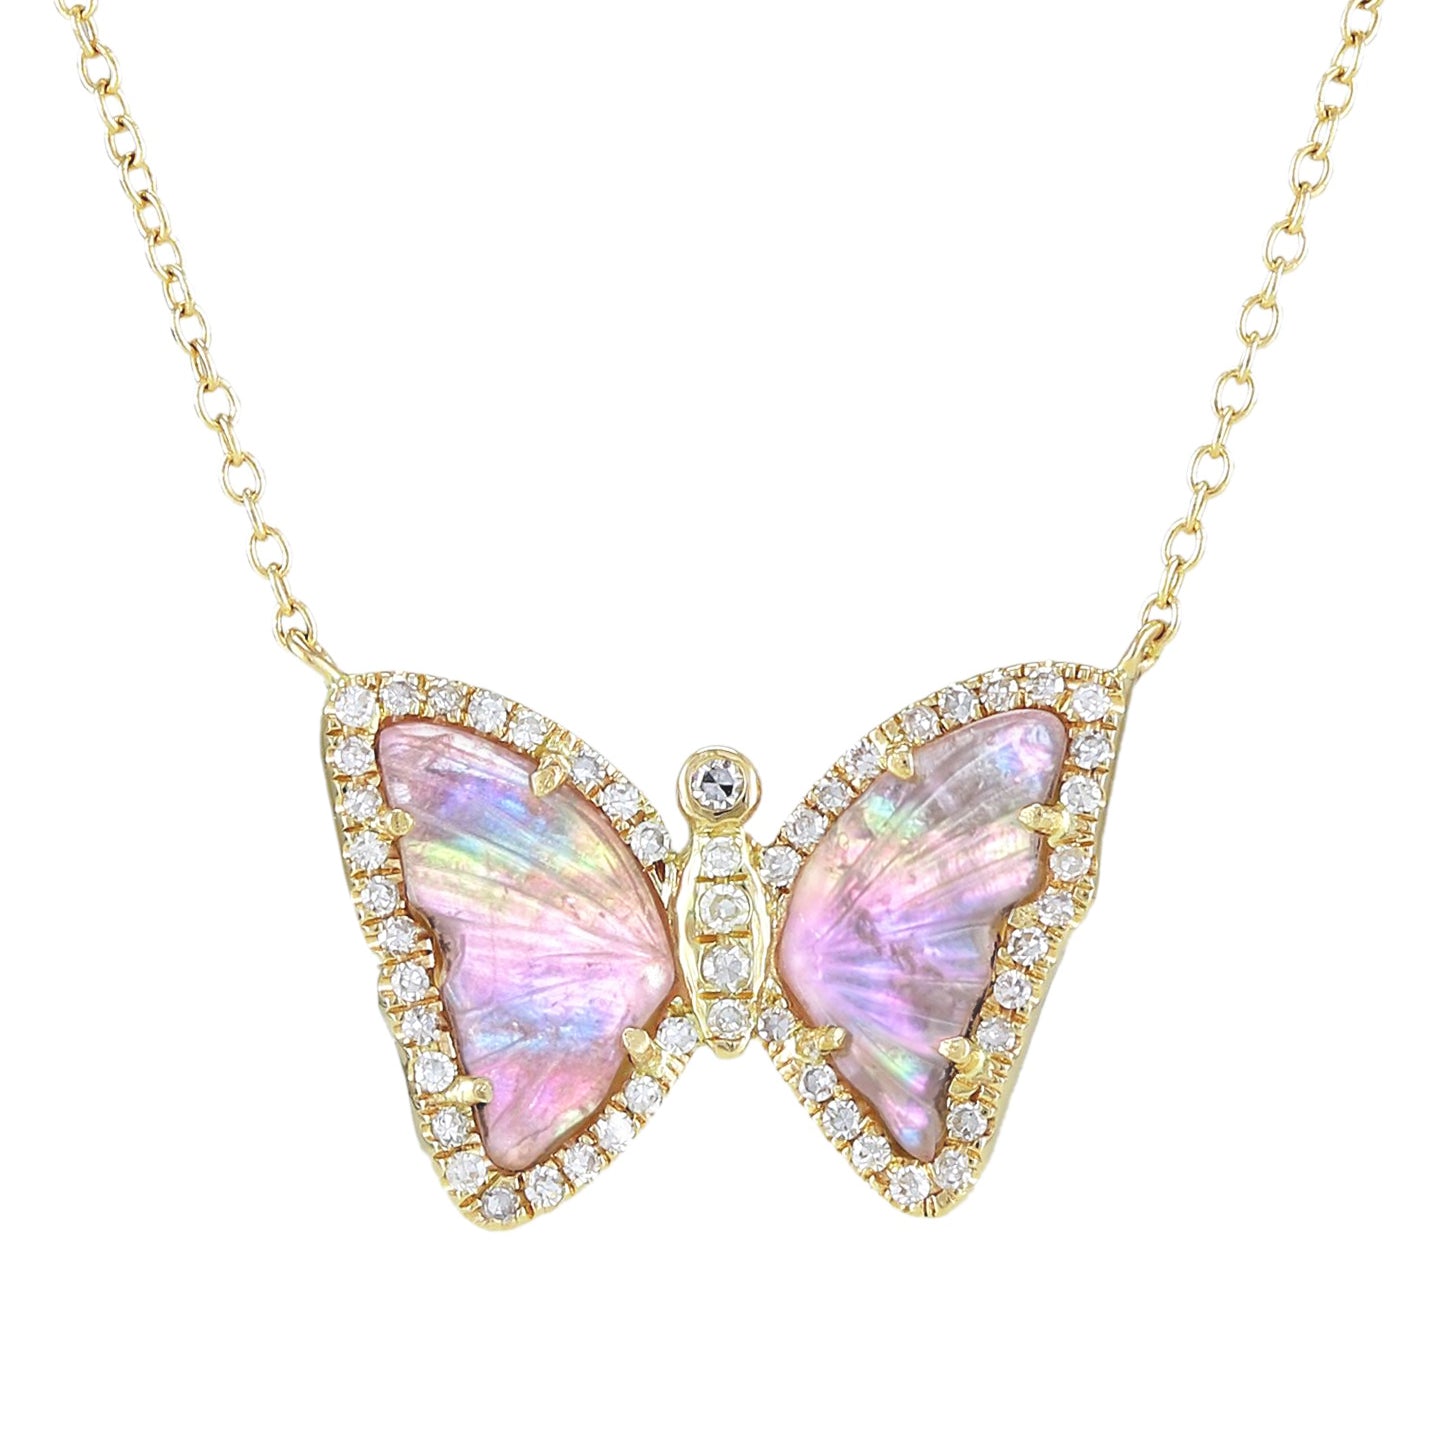 Blush Tourmaline Butterfly Necklace With Pearl and Diamonds